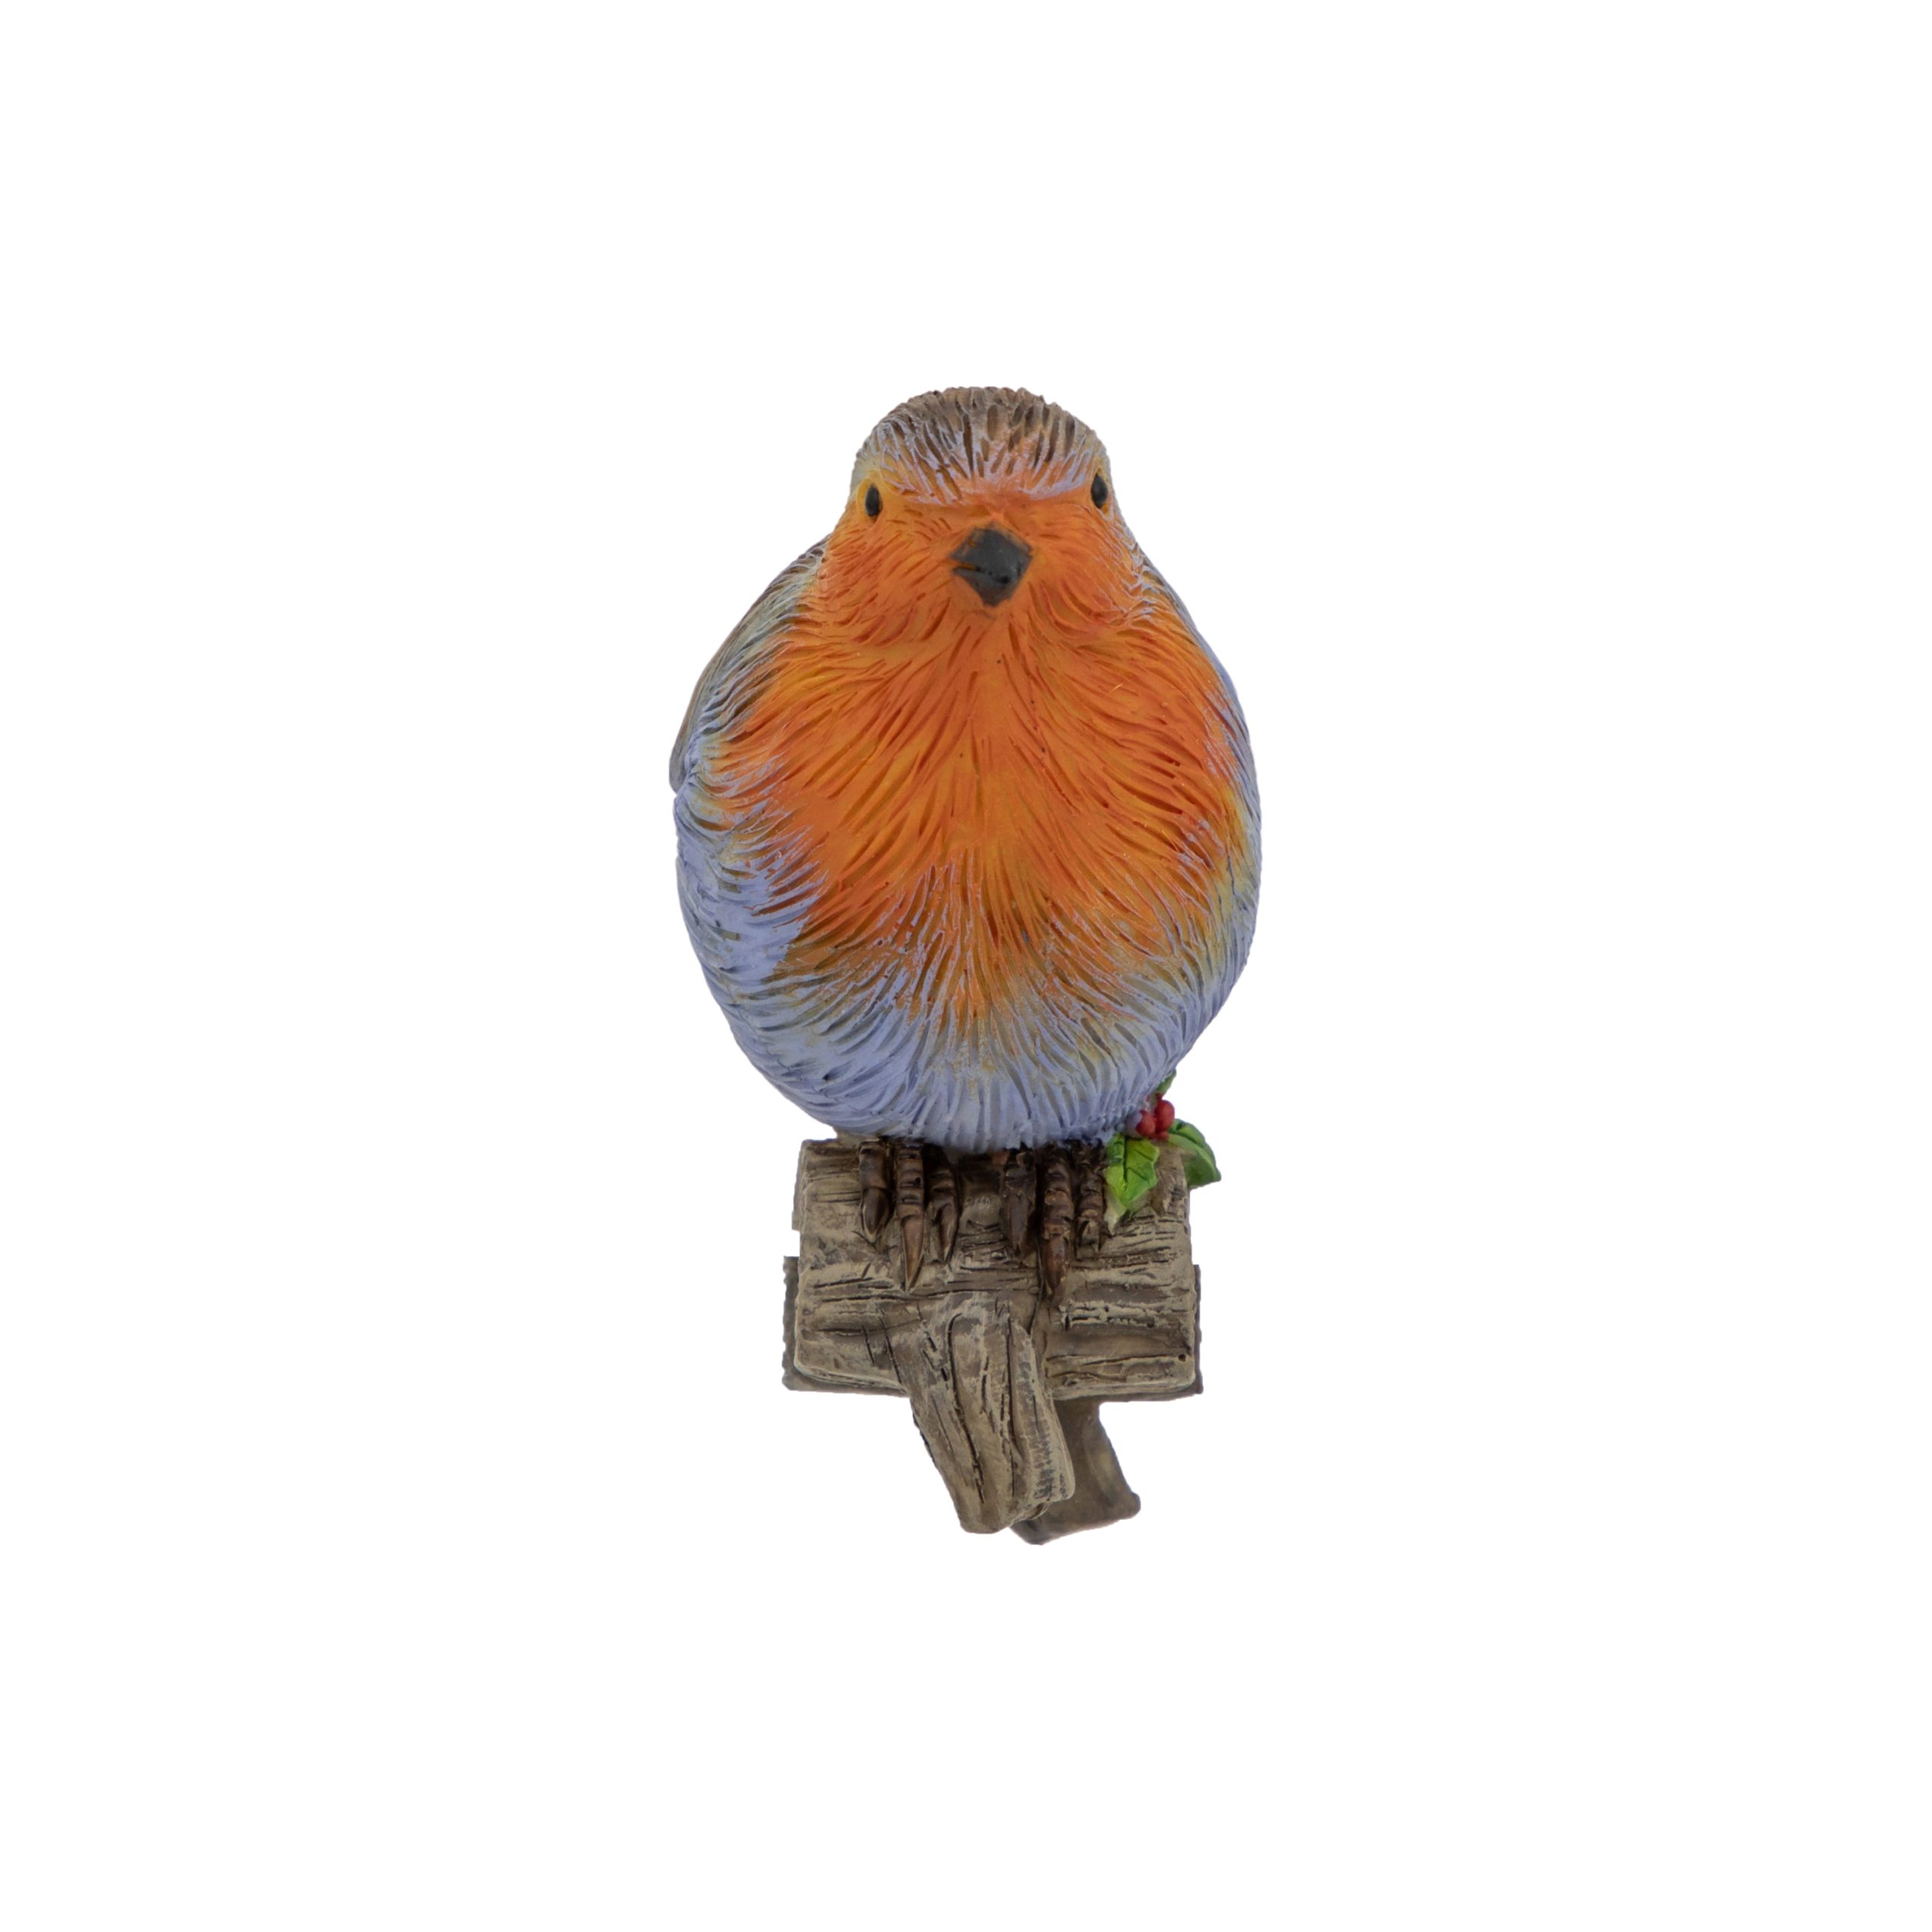 Gallery Direct Ruby Robin Pothanger (Pack of 2)